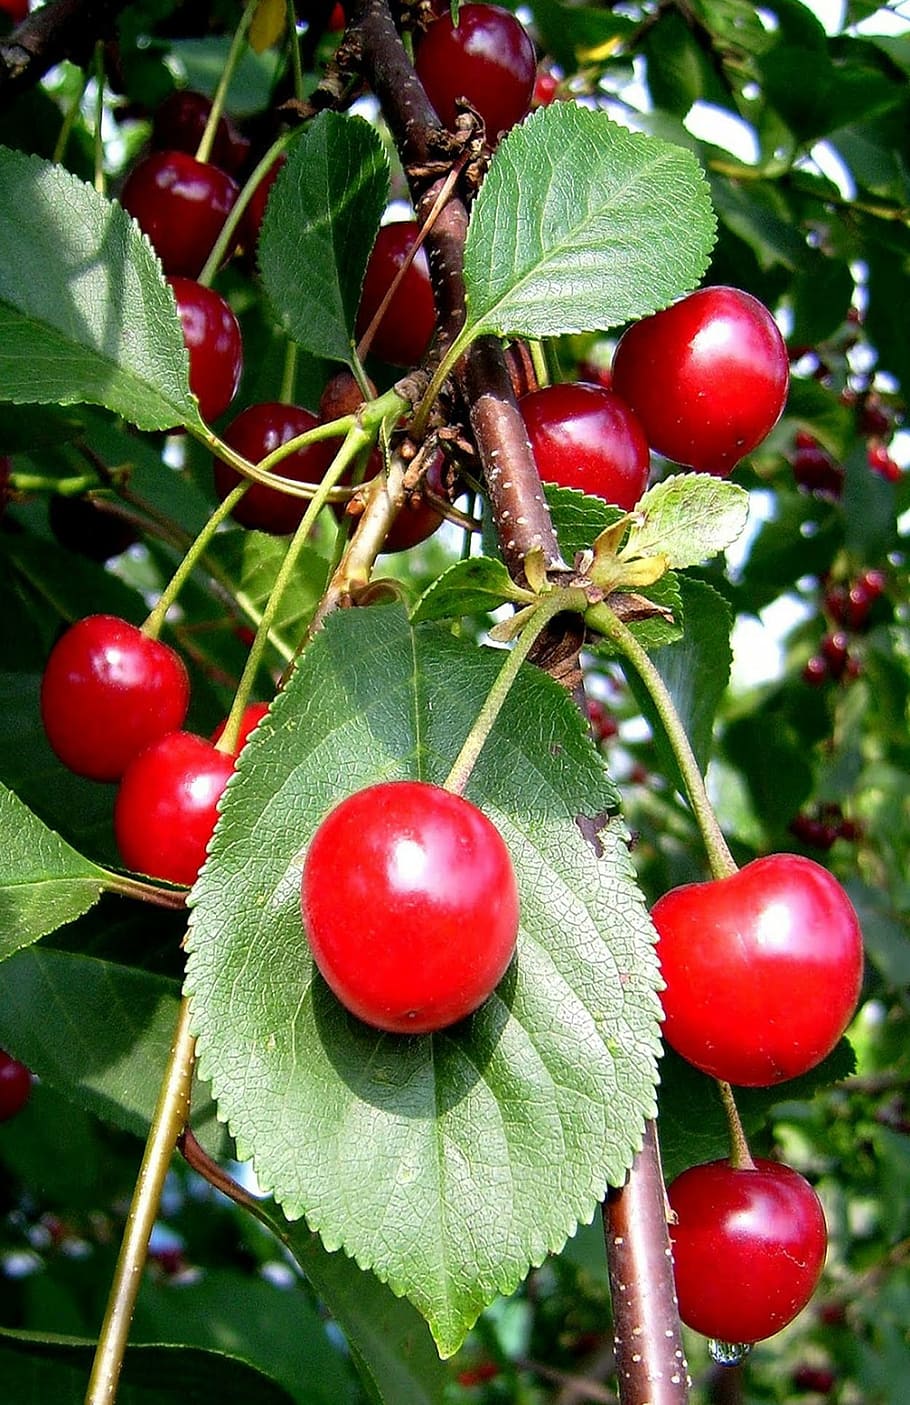 cherries, fruit, fruits, red fruits, sour, sour cherries, cherry, cherry harvest, healthy, food